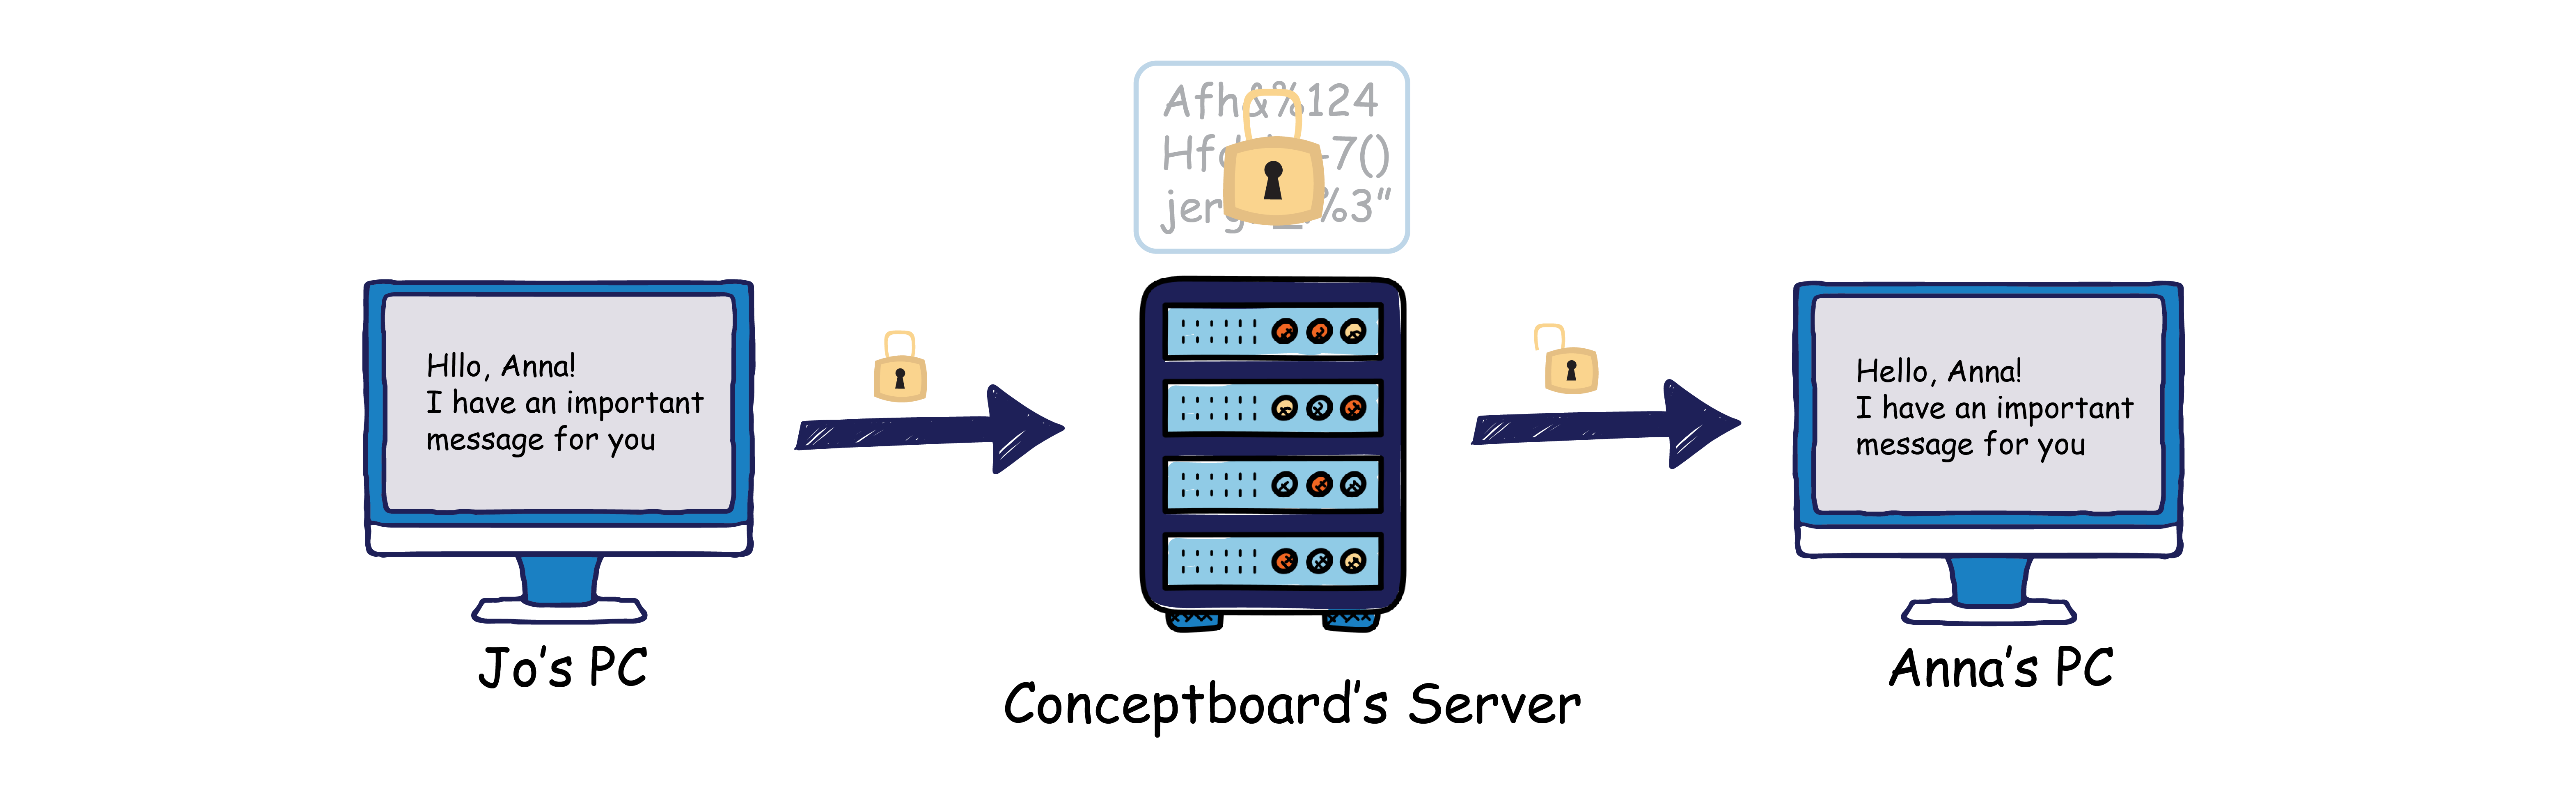 Illustration representing the end to end encryption process with two PCs and a server